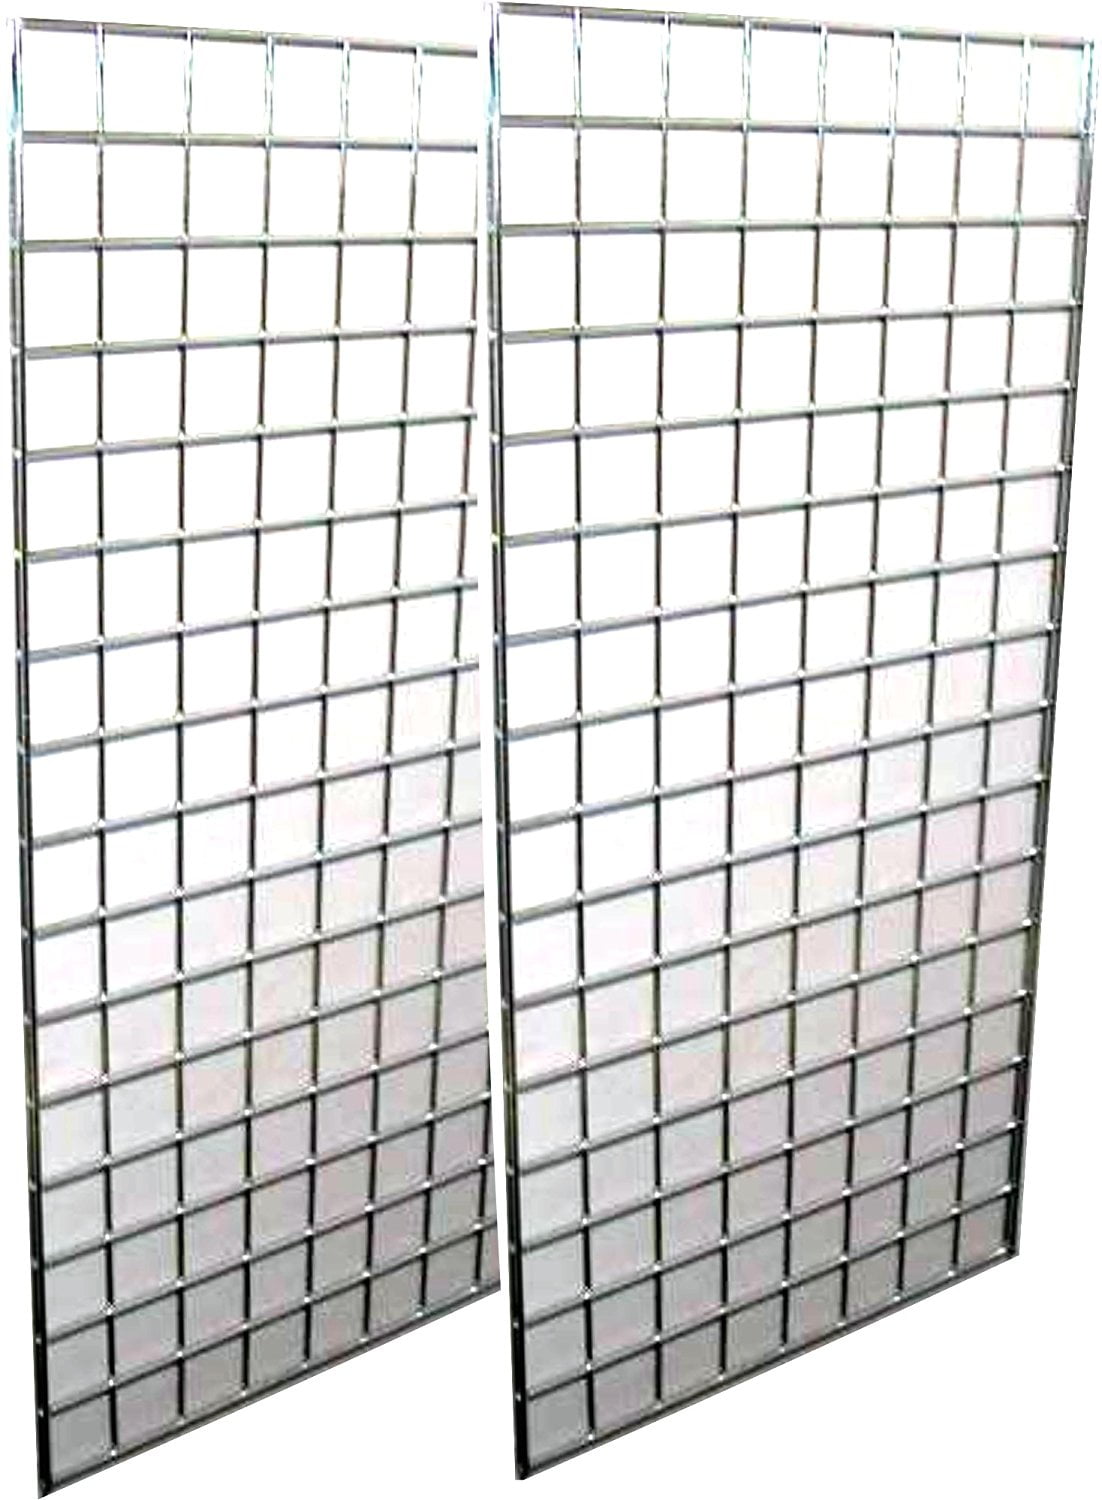 2' x 5' Grid Panel 4-Sided Floorstanding Display Fixture with Rolling Base. 